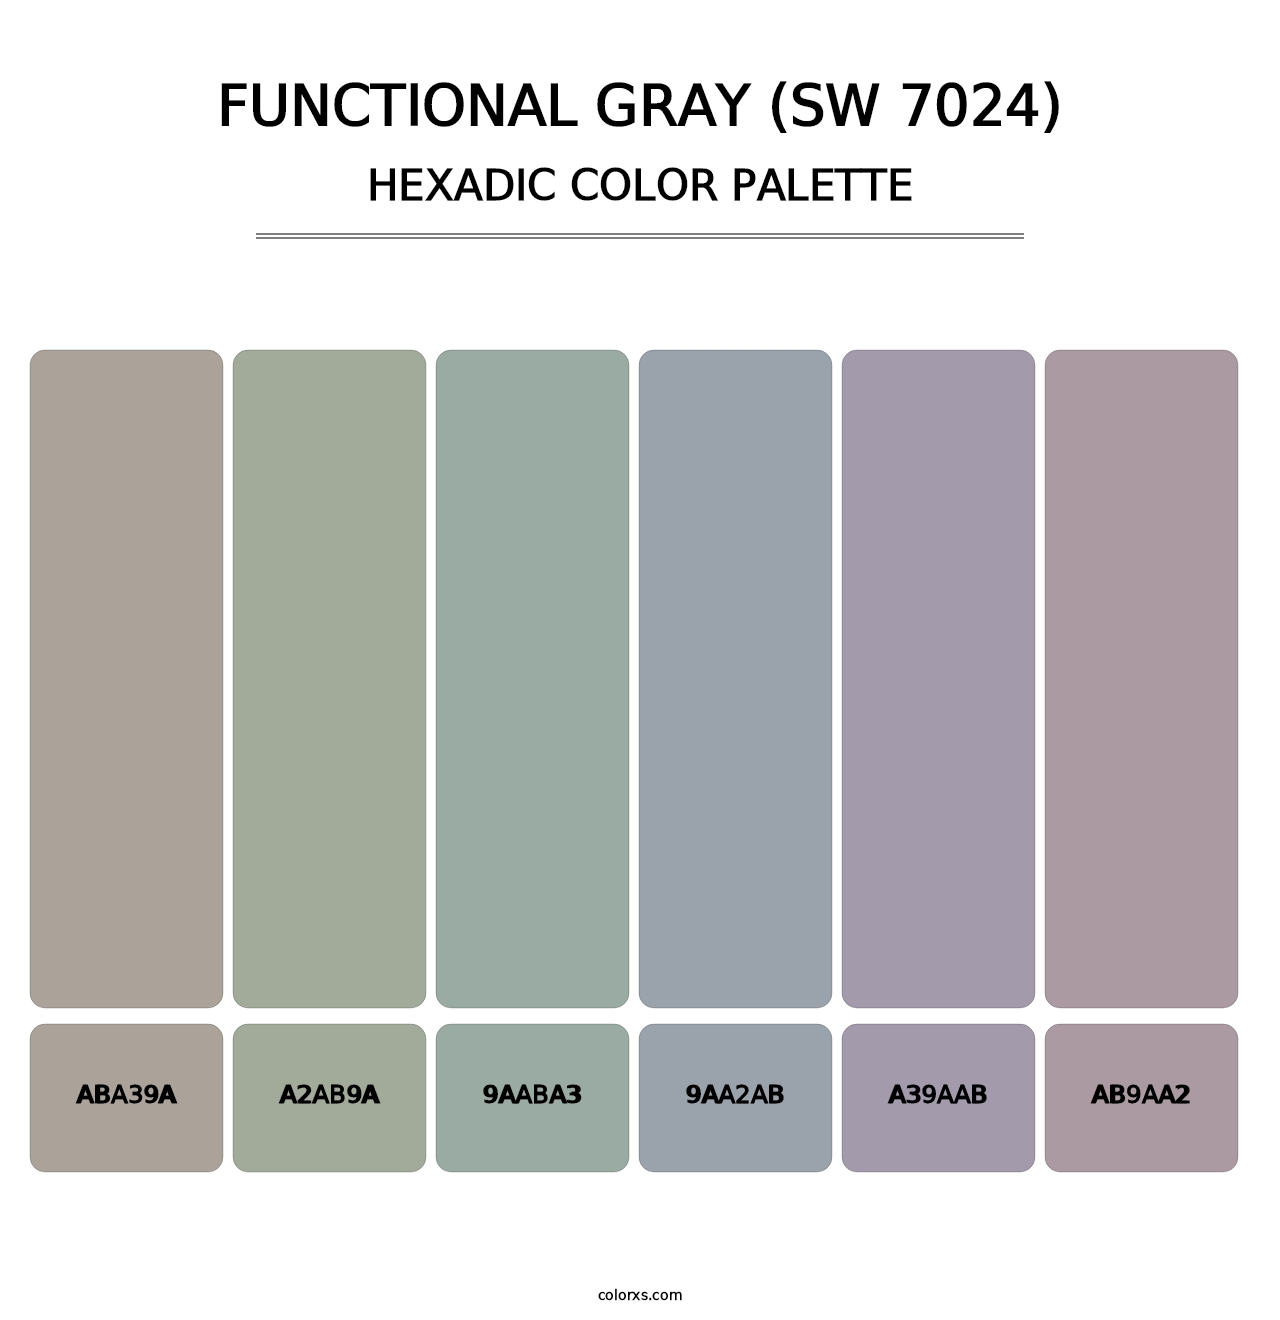 Functional Gray (SW 7024) - Hexadic Color Palette